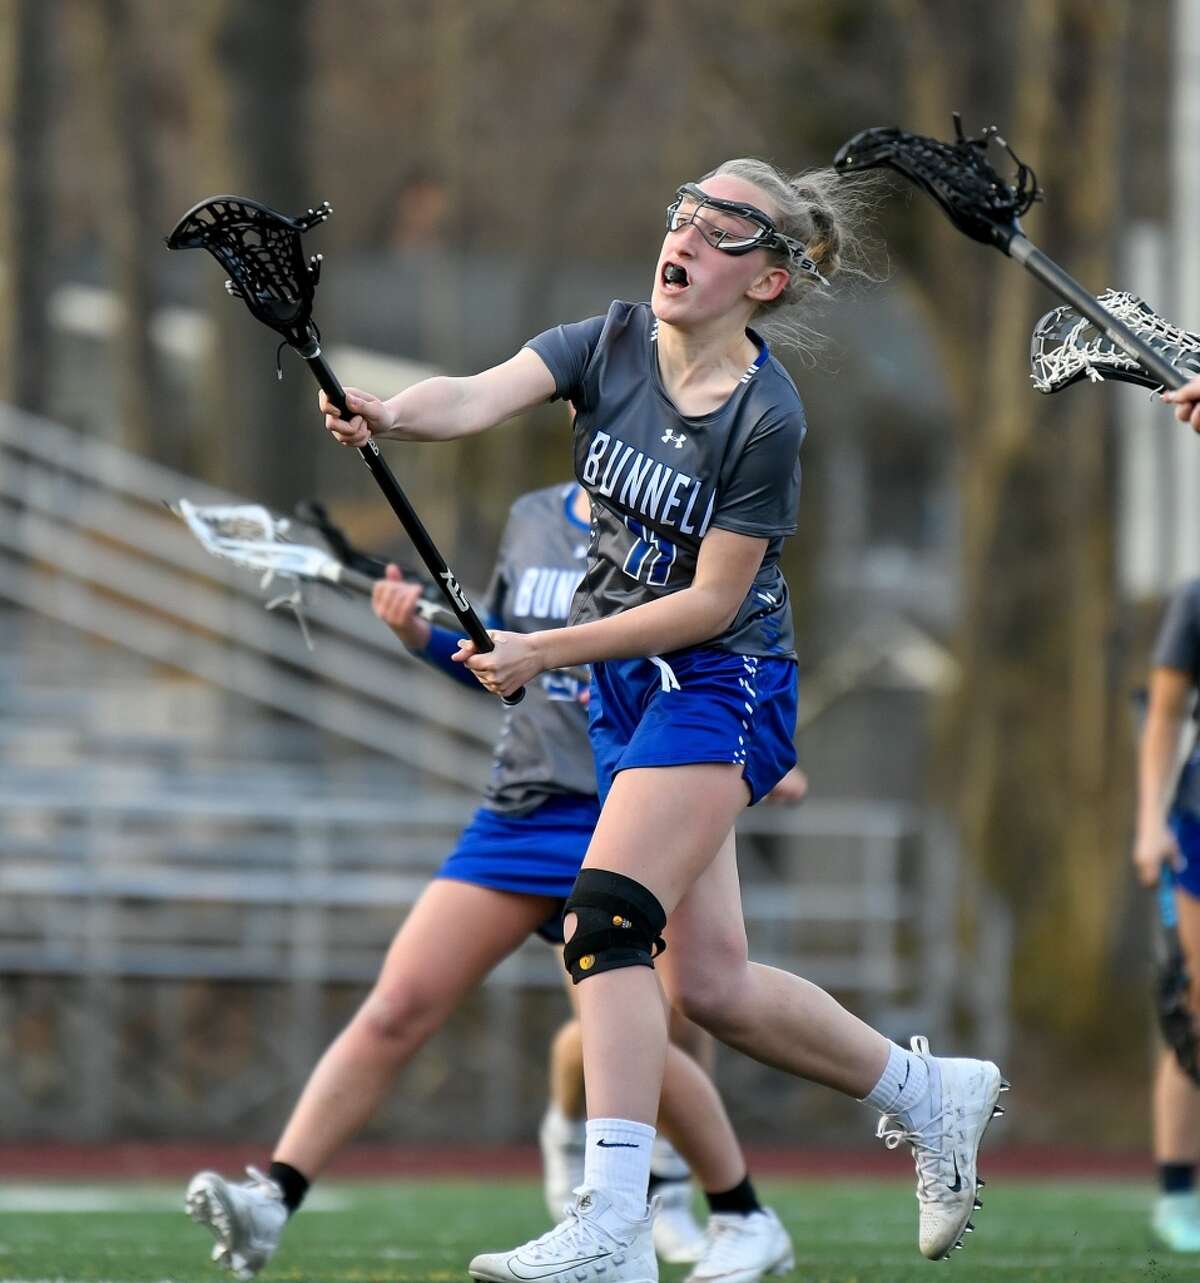 Morgan Reilly unleashes a shot during Bunnell’s win. The sophomore scored six goals for the Lady Bulldogs.